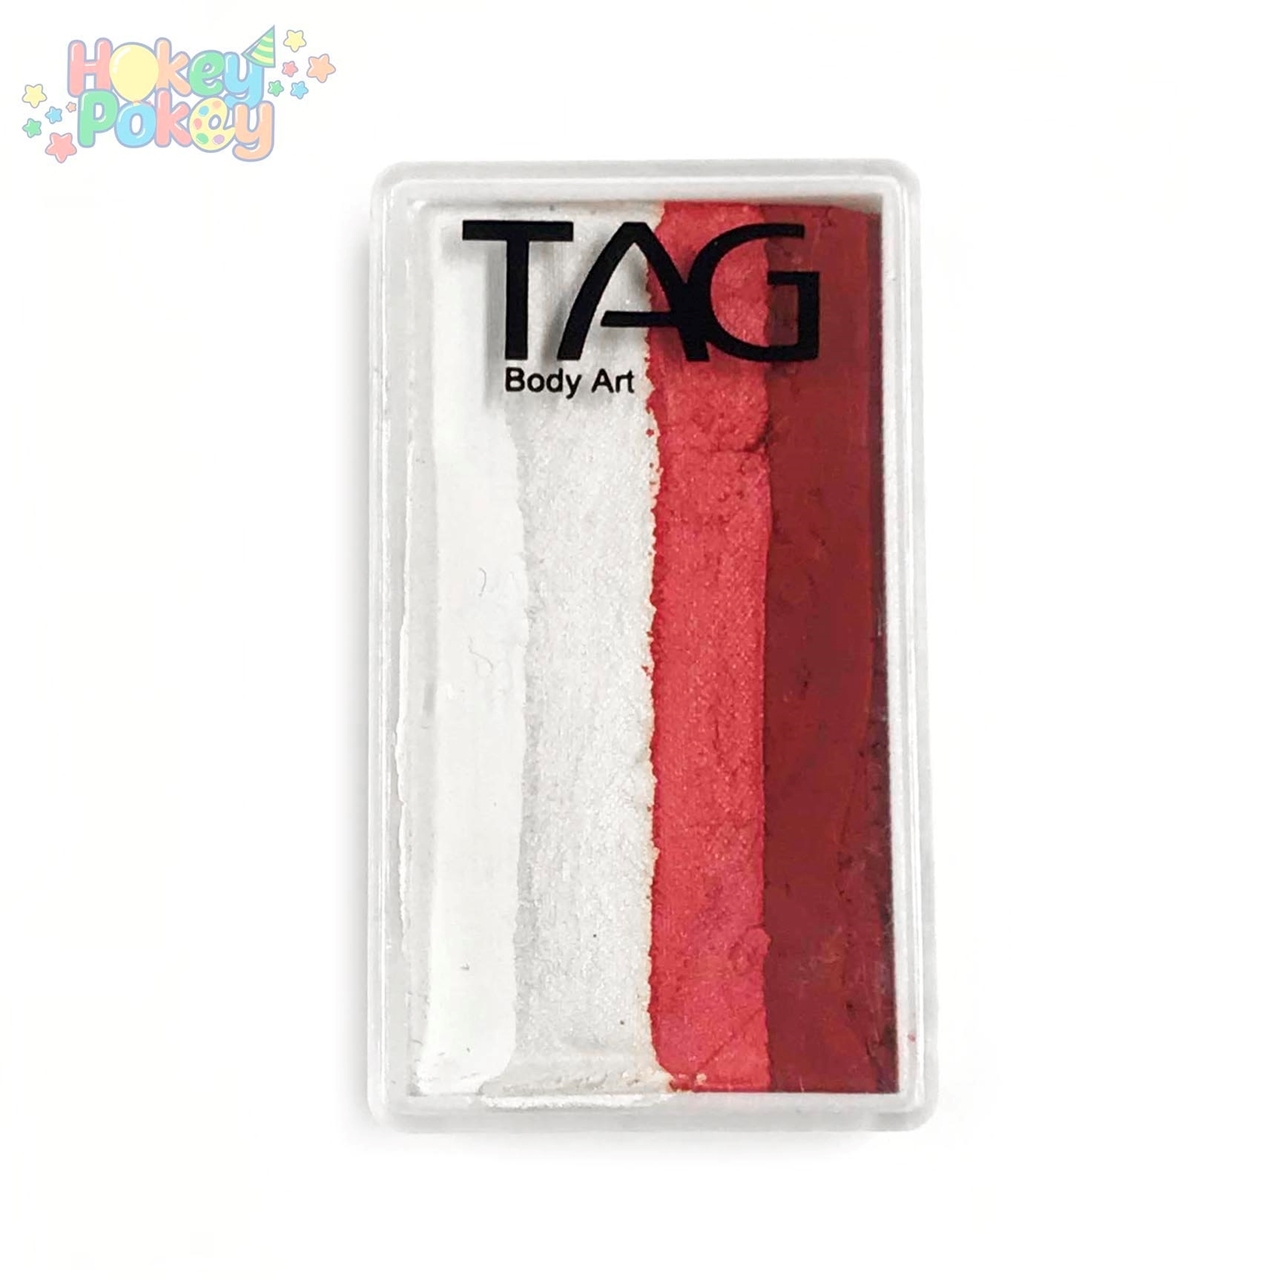  TAG Face and Body Paint - 1 Stroke Split Cake 30g